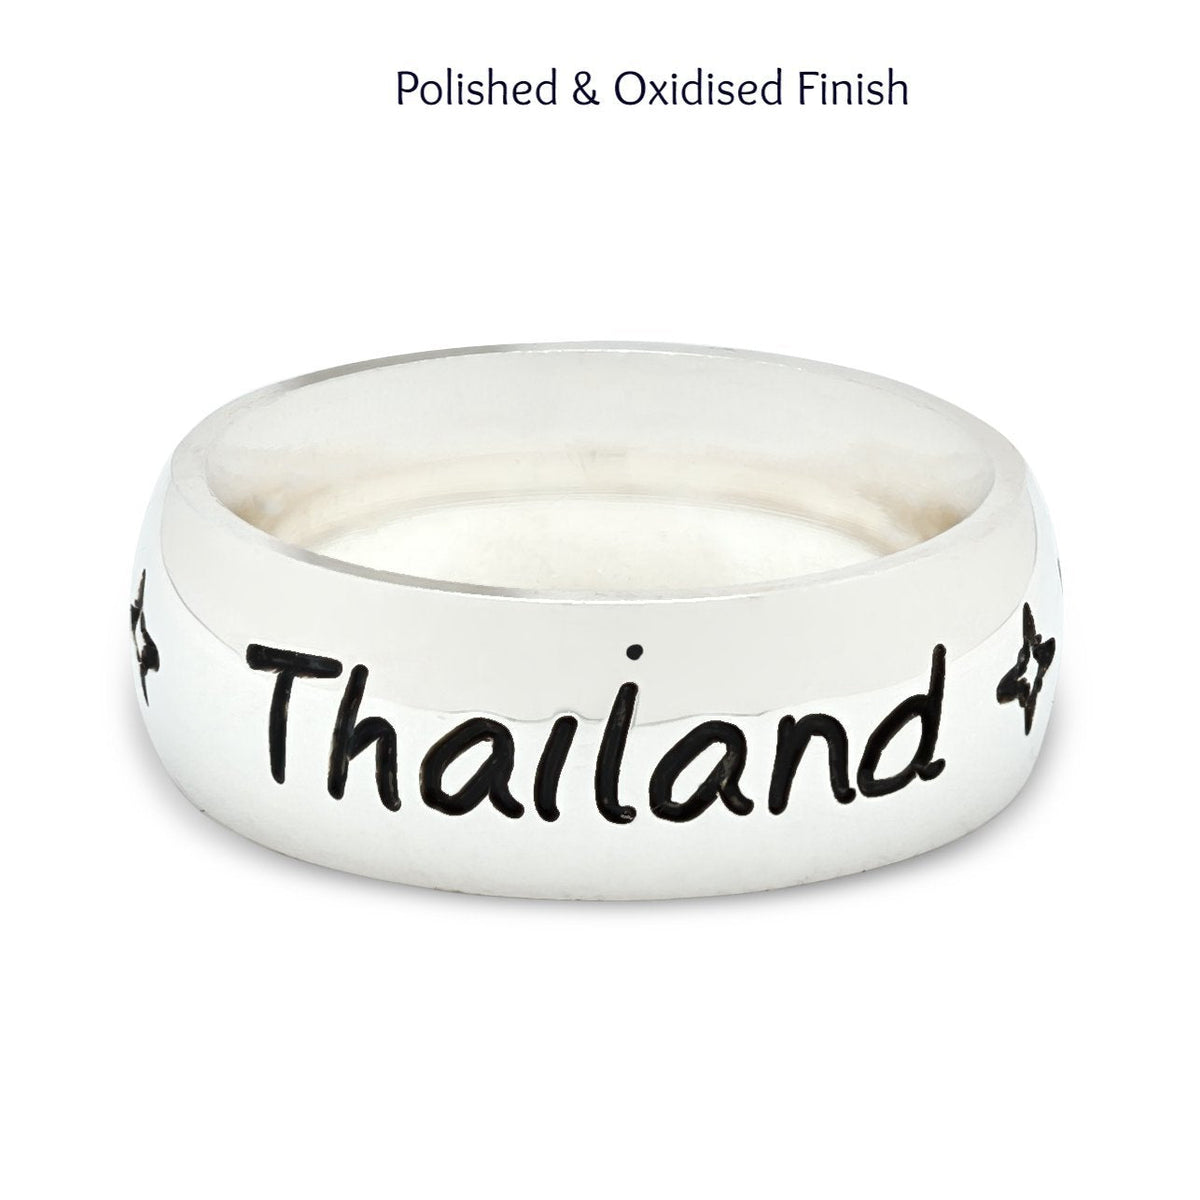 Unusual travel gift for someone going to Thailand, engraved silver mens womens ring